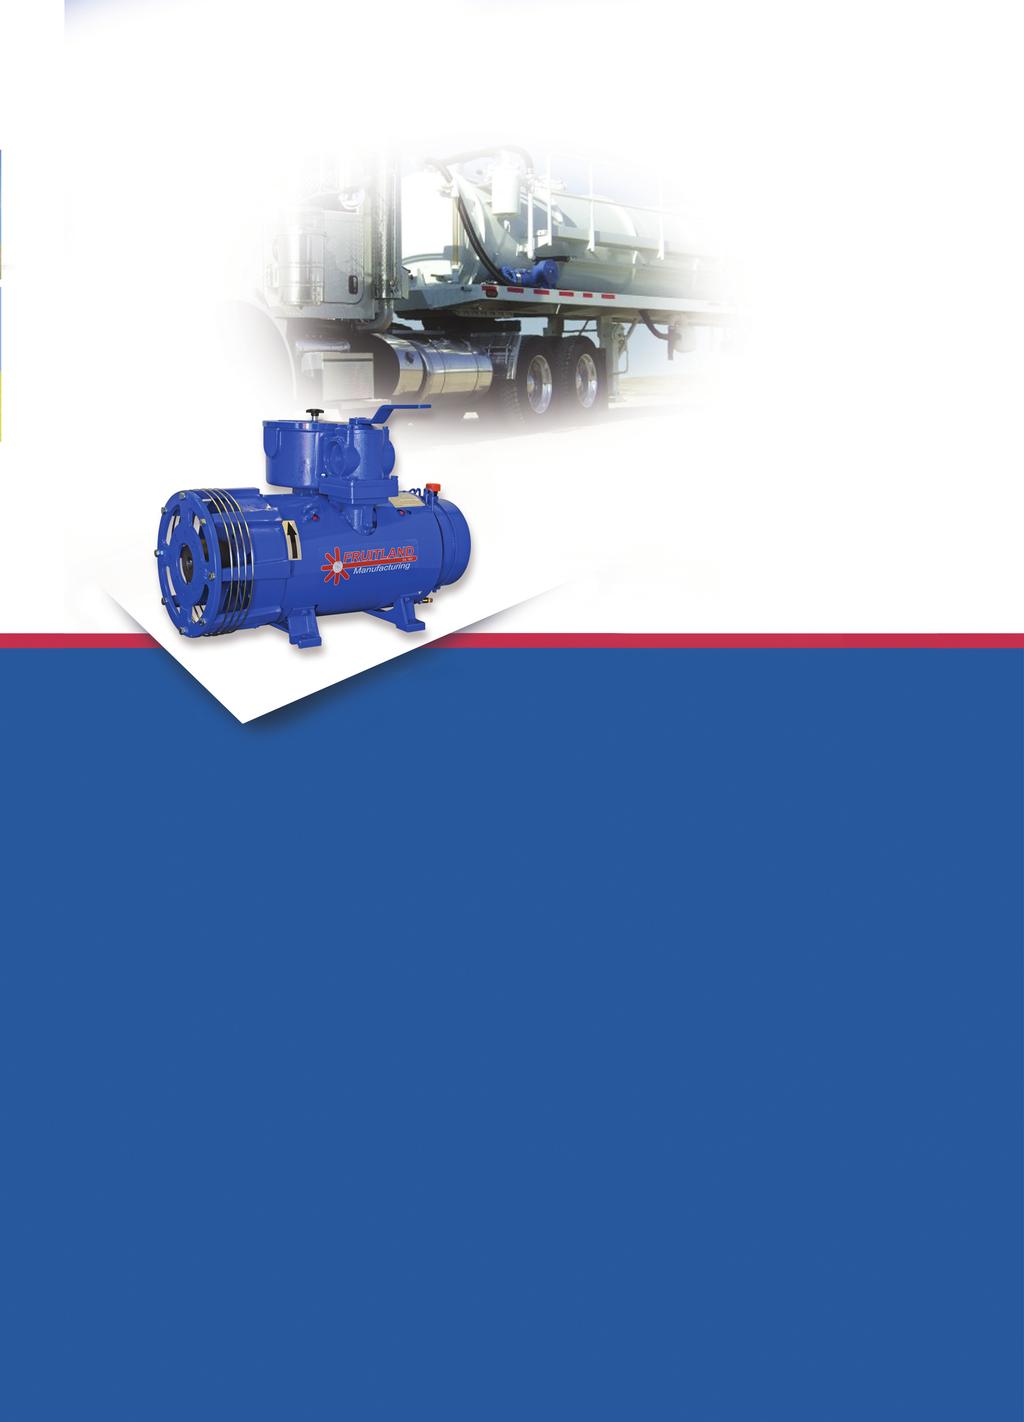 Driven. By Design Fruitland Rotary Vane Vacuum Pumps are renowned for their reliability, performance and ease of installation.